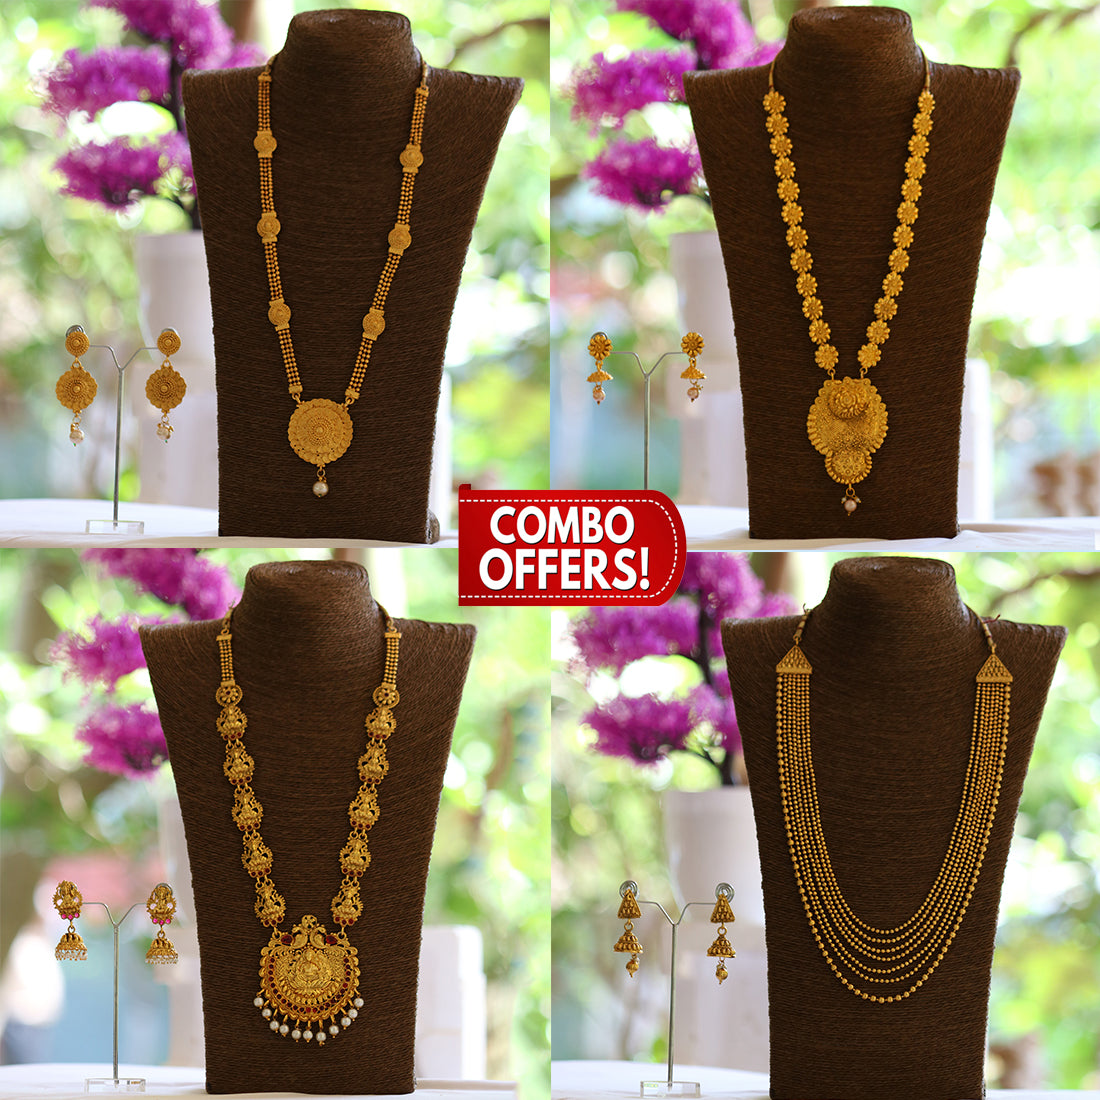 Big Save Combo Offer Necklaces